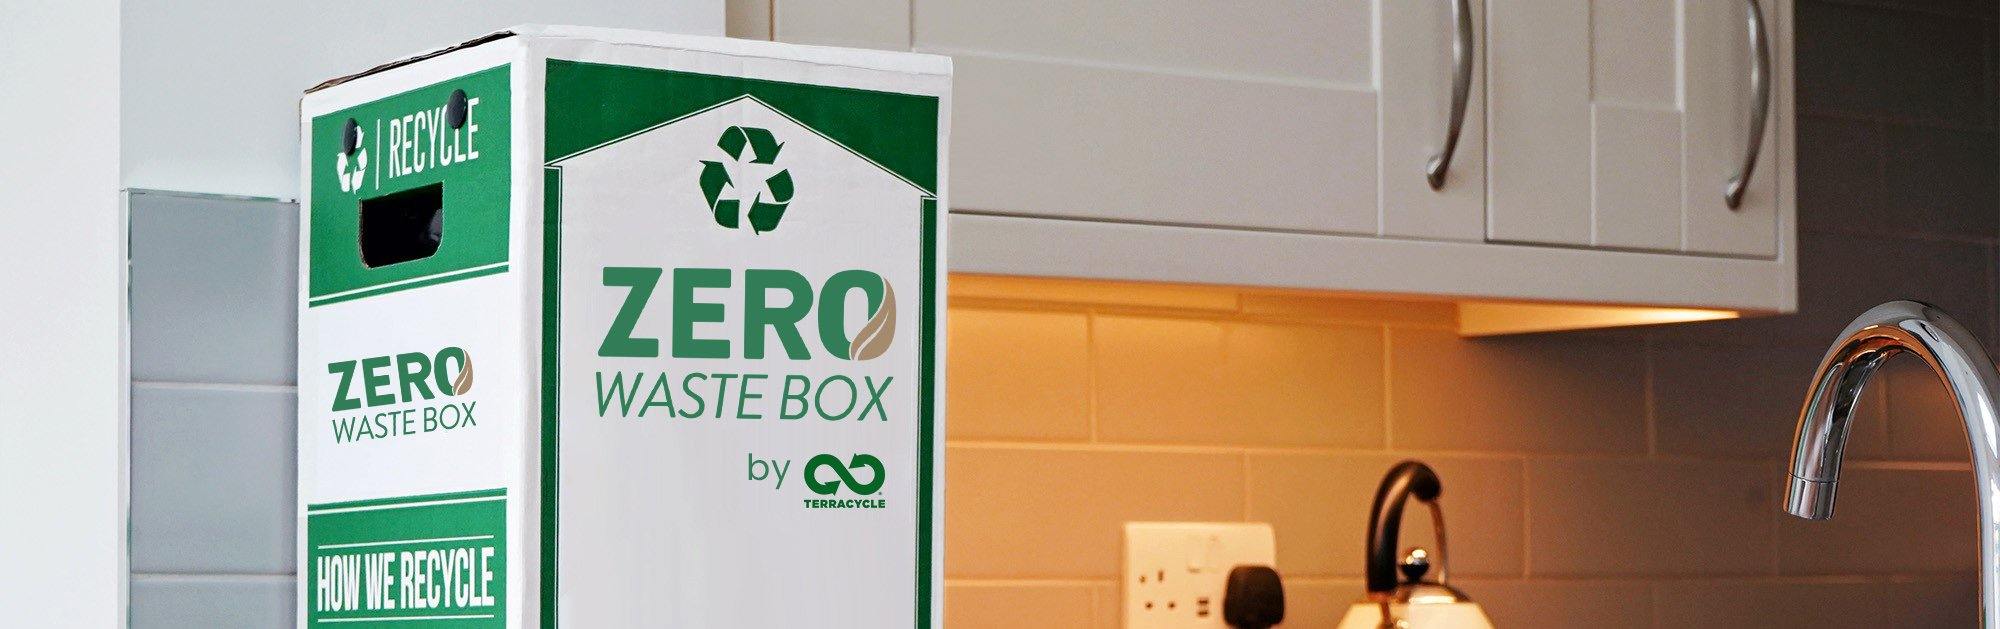 Recycle shipping materials  Zero Waste Box™ by TerraCycle - US